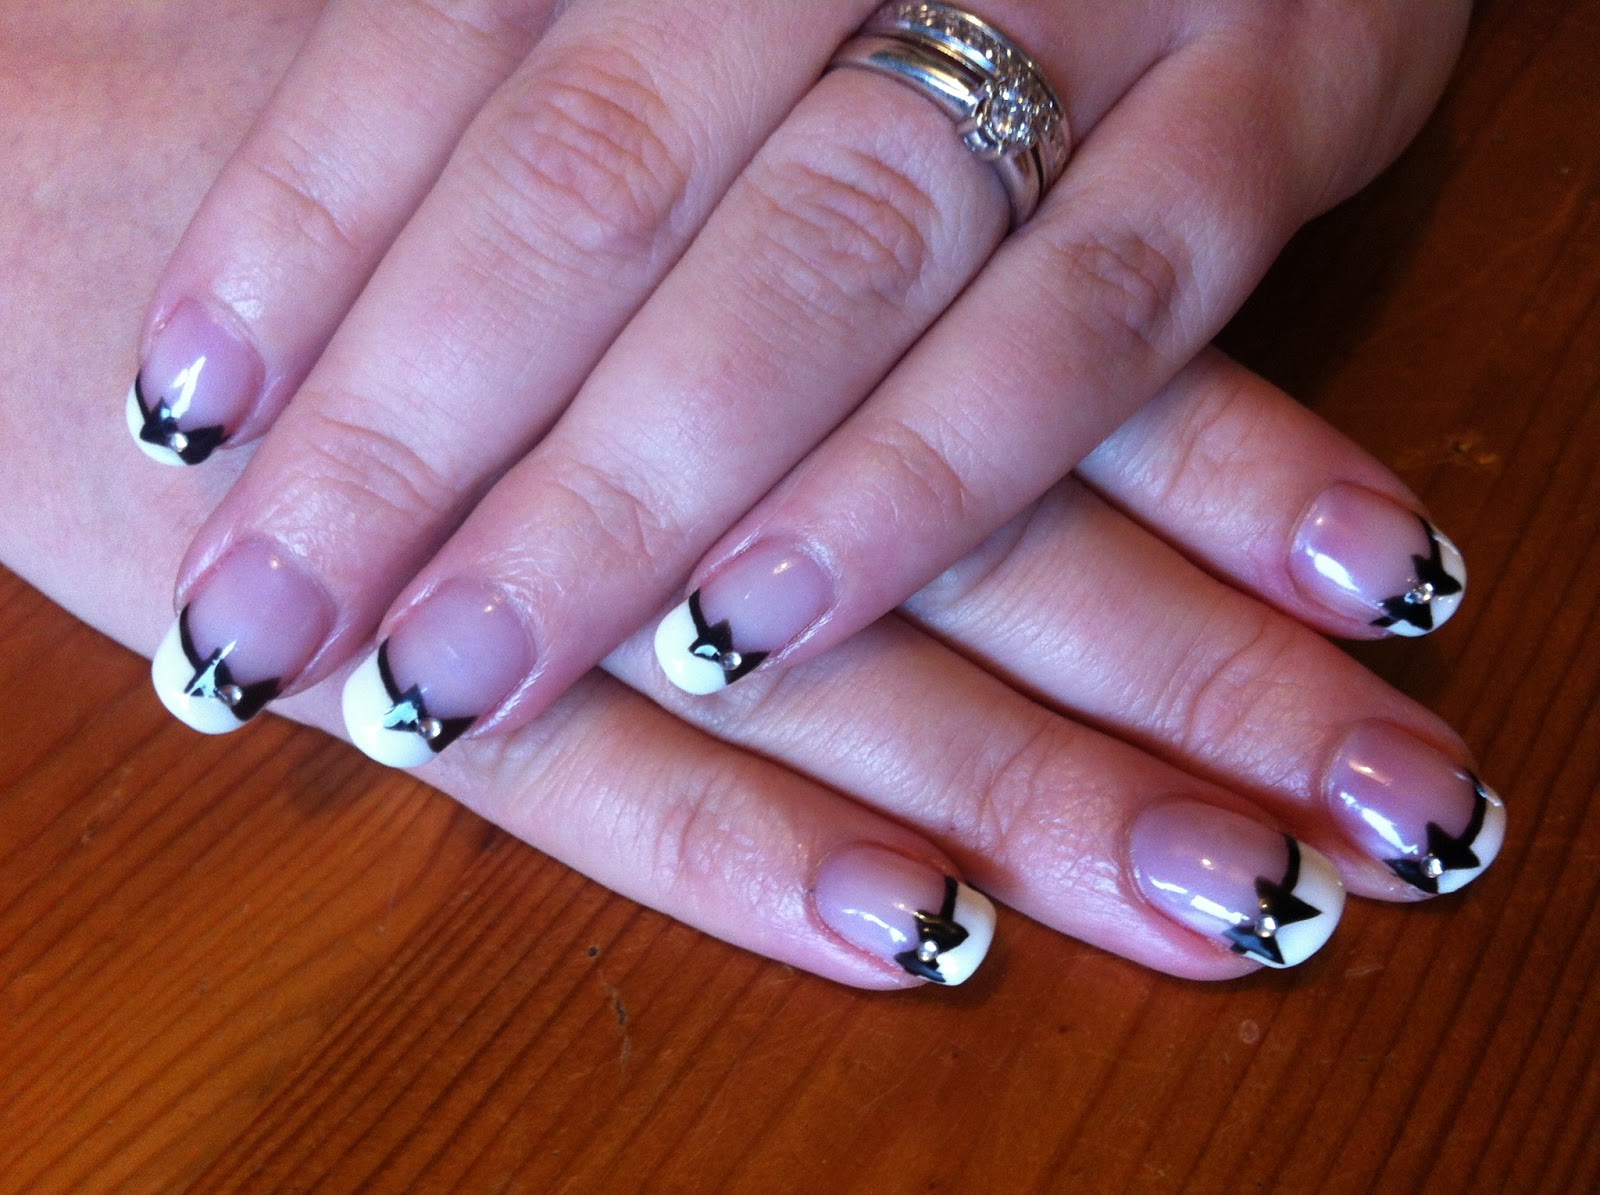 Brush up and Polish up!: CND Shellac Nail Art - French Manicure with